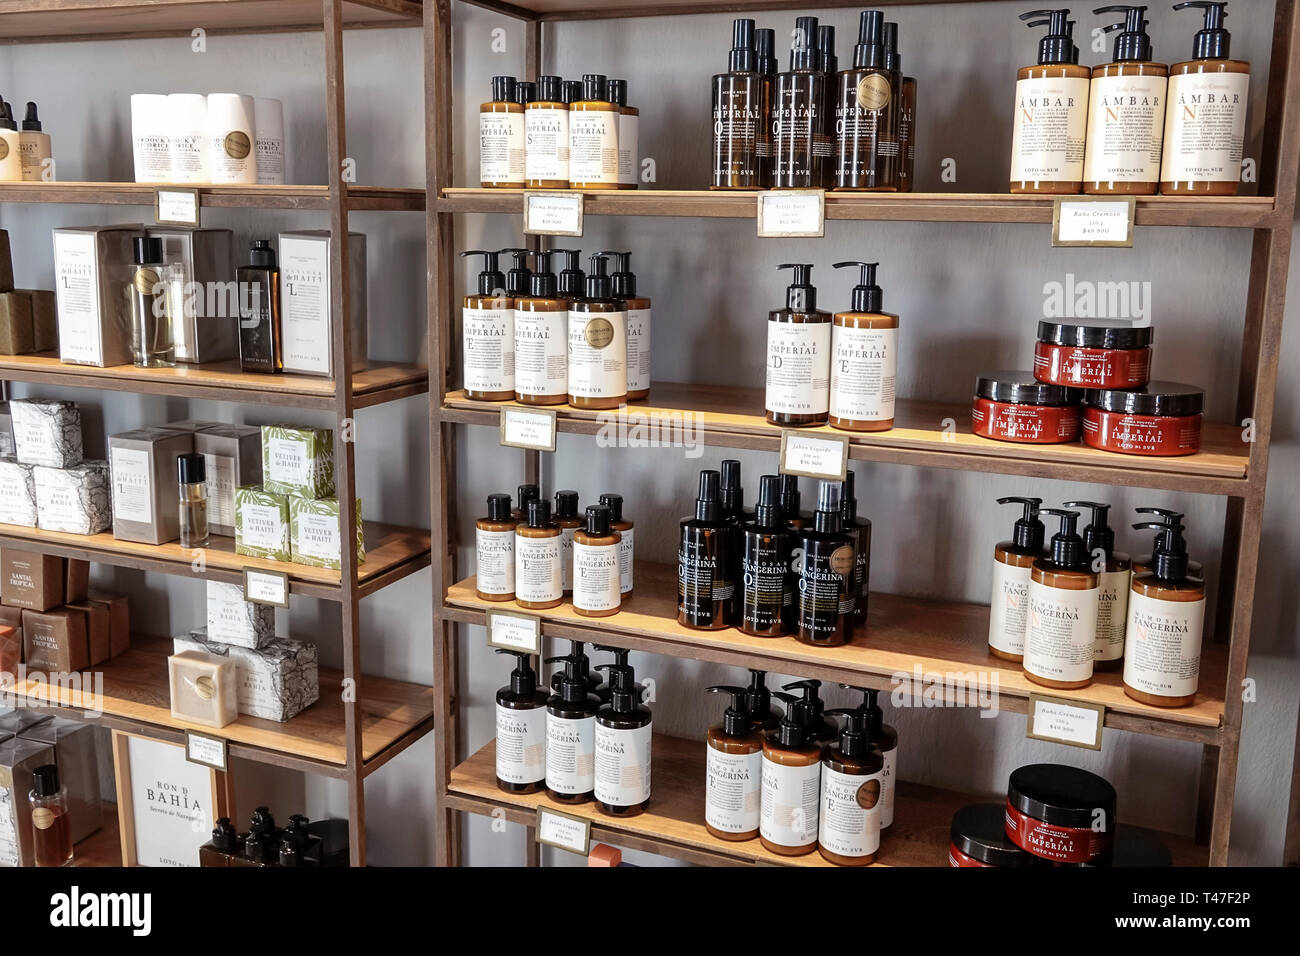 Cartagena Colombia,Loto Del Sur,boutique,premium botanical beauty products brand,lotions,perfumes,display sale,inside interior,COL190122097 Stock Photo